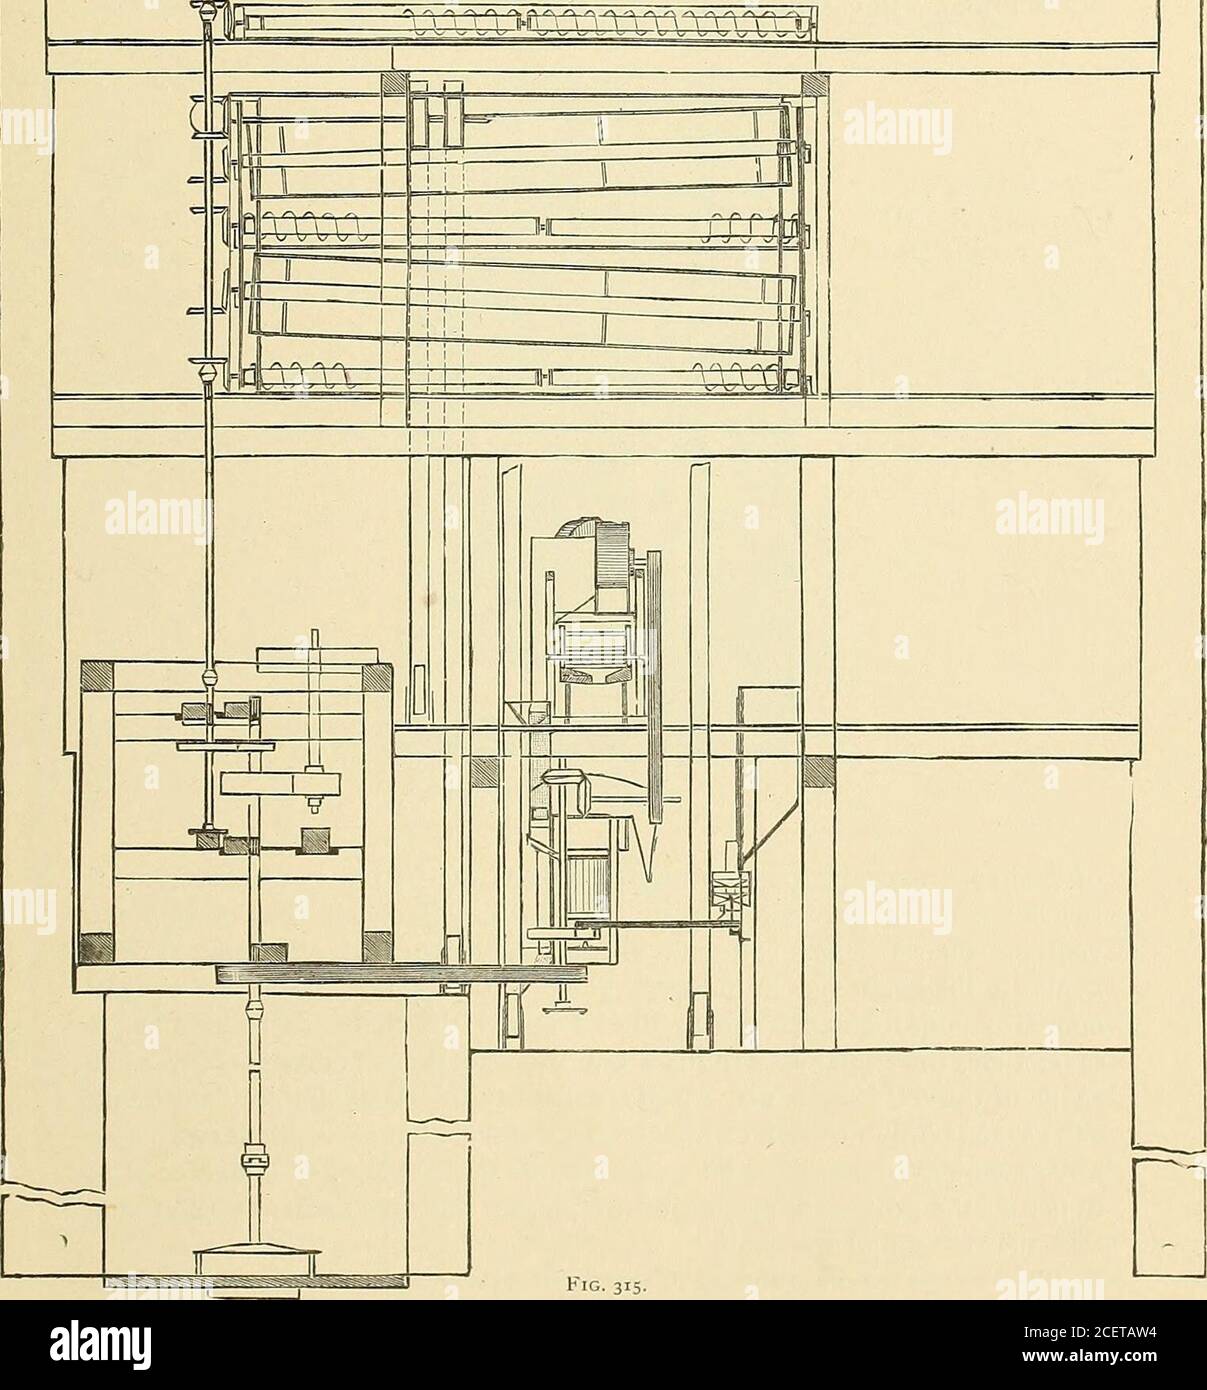 . The miller, millwright and millfurnisher. Fig. 314. mill should be arranged so that there shall be a minimum amount of crossconveying and re-elevating,and a good system of spouting enables the ma- SPOUTING. 465 terial to be put where wanted, with a maximum expense for outlay andpower. ^ q 1 ^ ^ ri r^ &gt; 1^ r /^ ^ ^ ^^ ^ /^ ^ ^ ^ ^^ J L ^ L L *L L L „ I L V L CV J L f. The trough of the conveyor at the top of the mill may have short spouts,at intervals of four feet, which will take the wheat from the conveyors to the 466 ELEVATING, SPOUTING AND CONVEYING. bins. Each bin should have at its Stock Photo